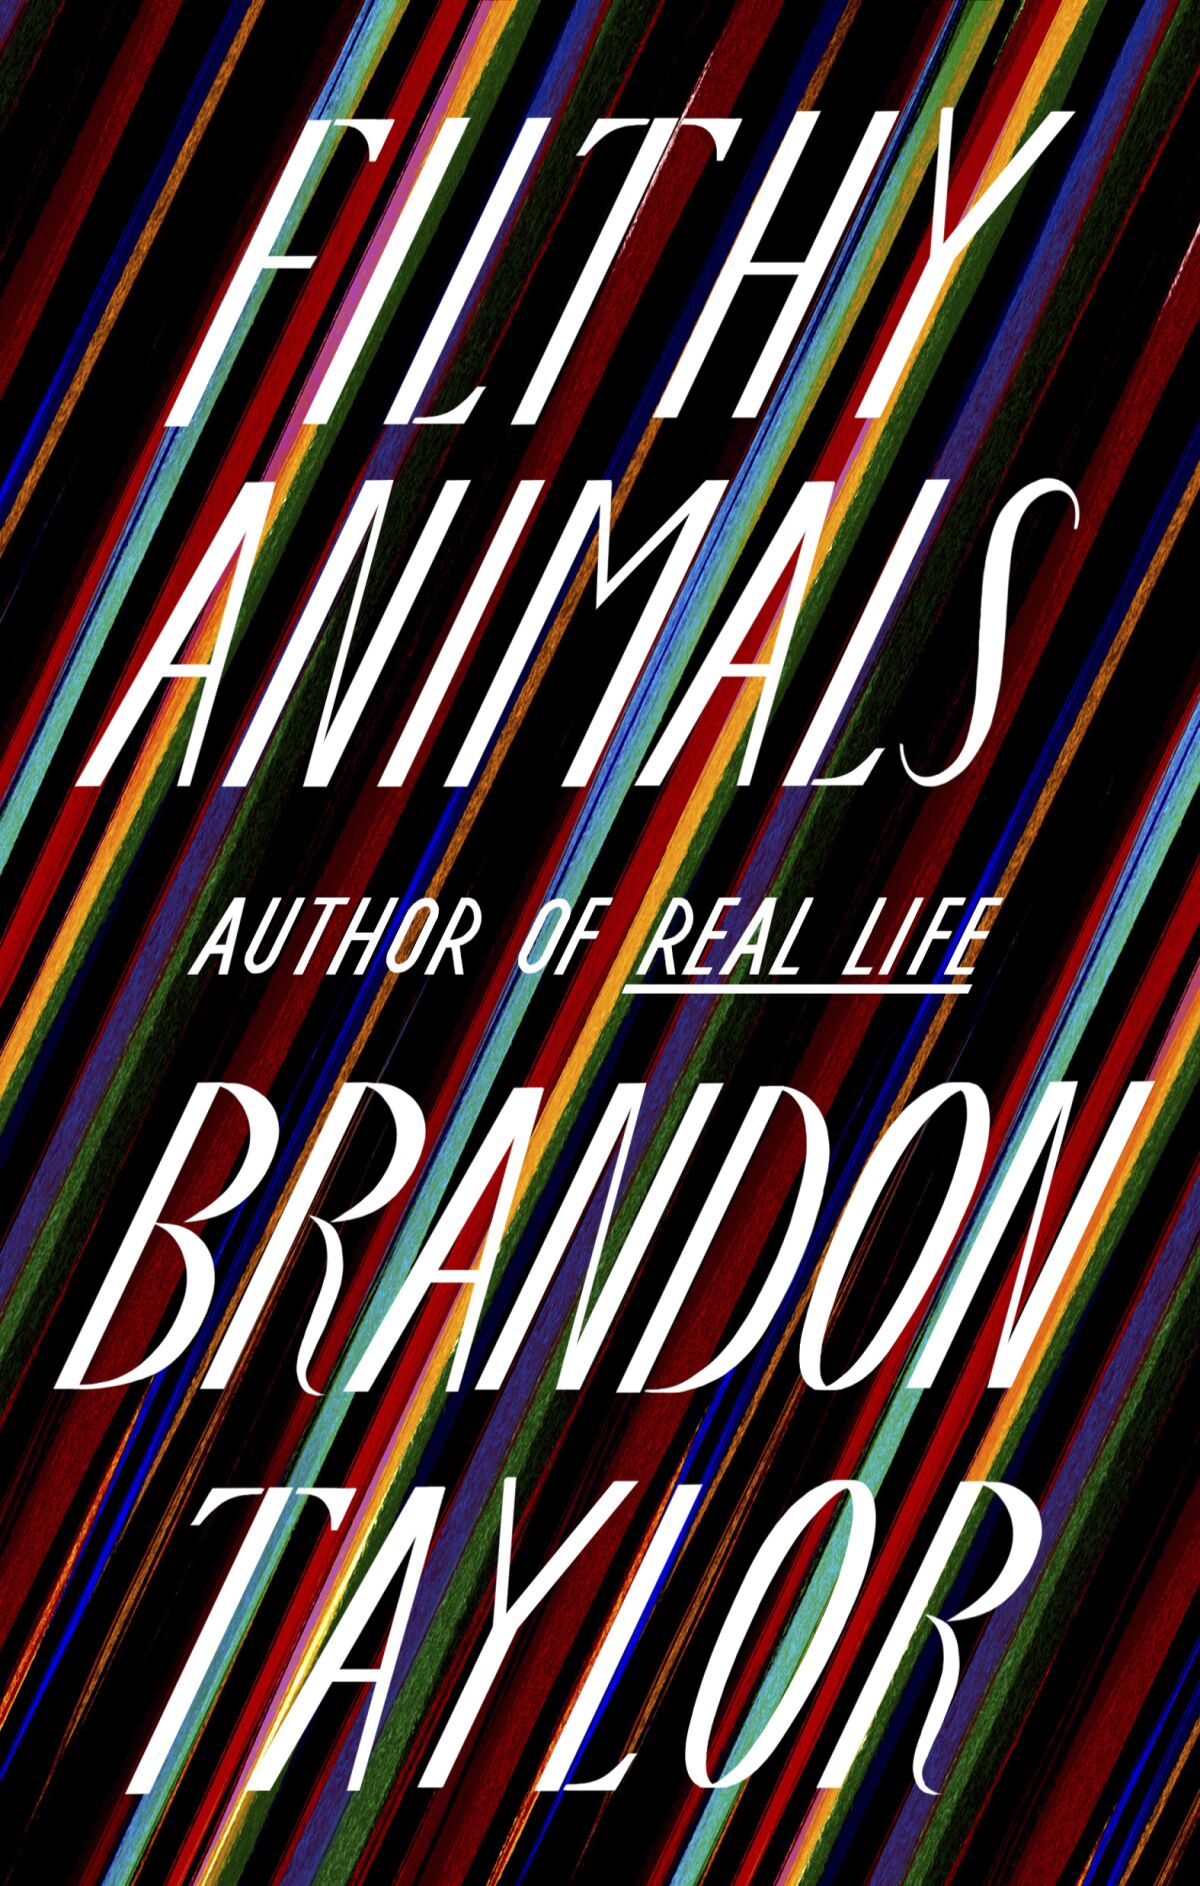 This cover image released by Riverhead shows "Filthy Animals" by Brandon Taylor. Taylor’s “Filthy Animals” has won the Story Prize, a $20,000 honor for works of short fiction. (Riverhead via AP)